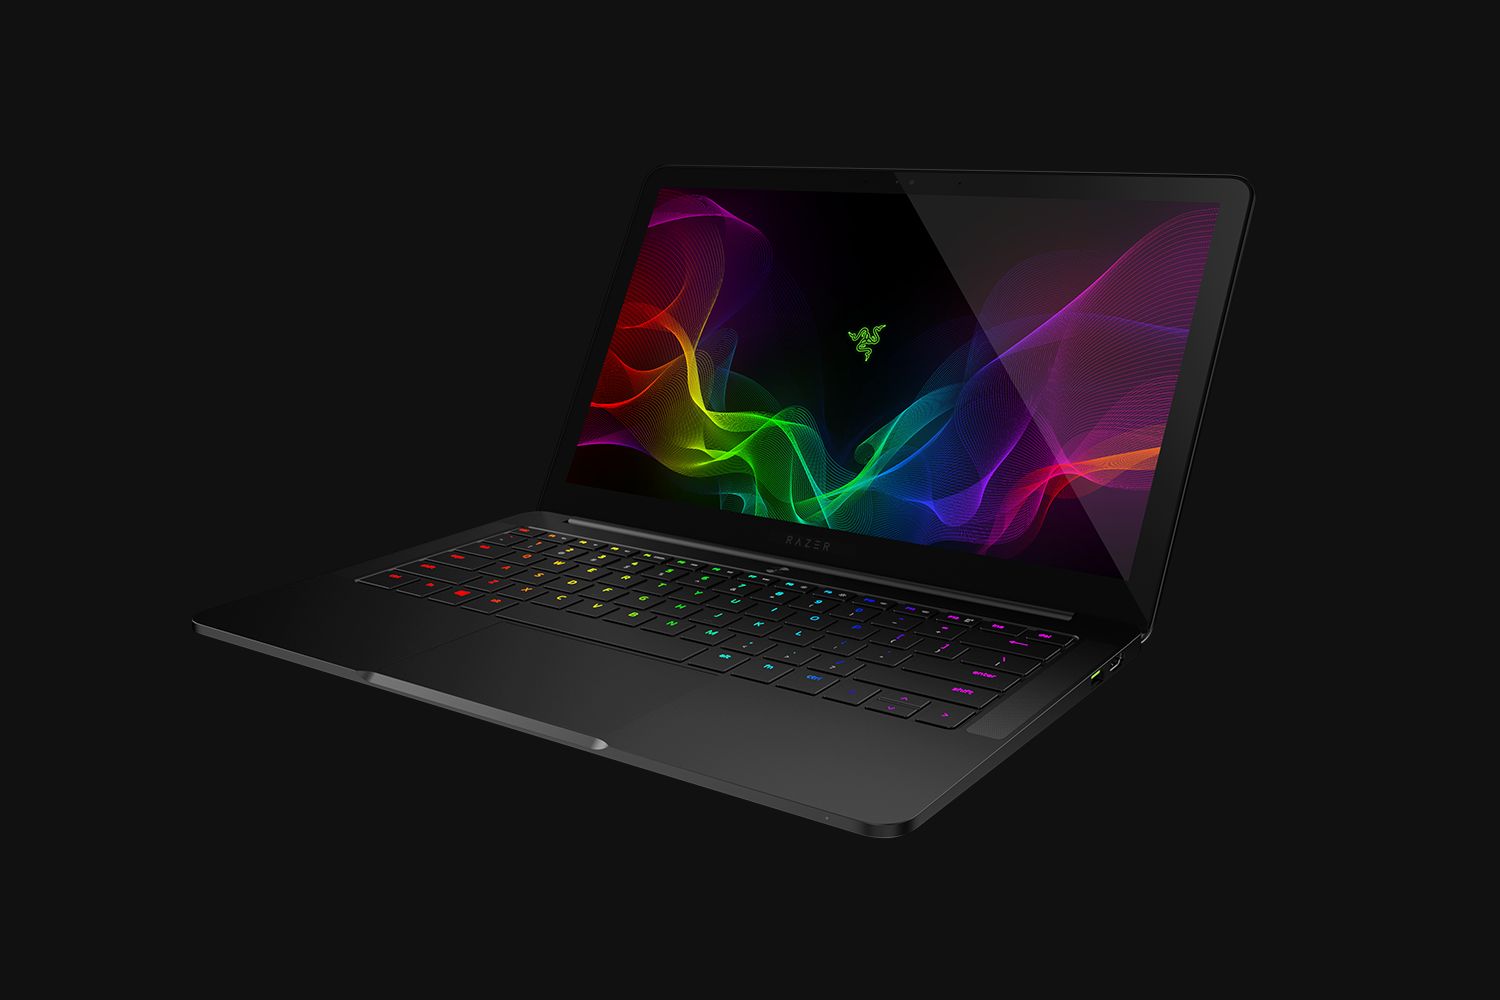 IFA 2019: Razer Stealth 13 Now Tucks A GTX GPU In An Ultra-Thin 15.3 mm Chassis Making It The World’s First Gaming Ultrabook